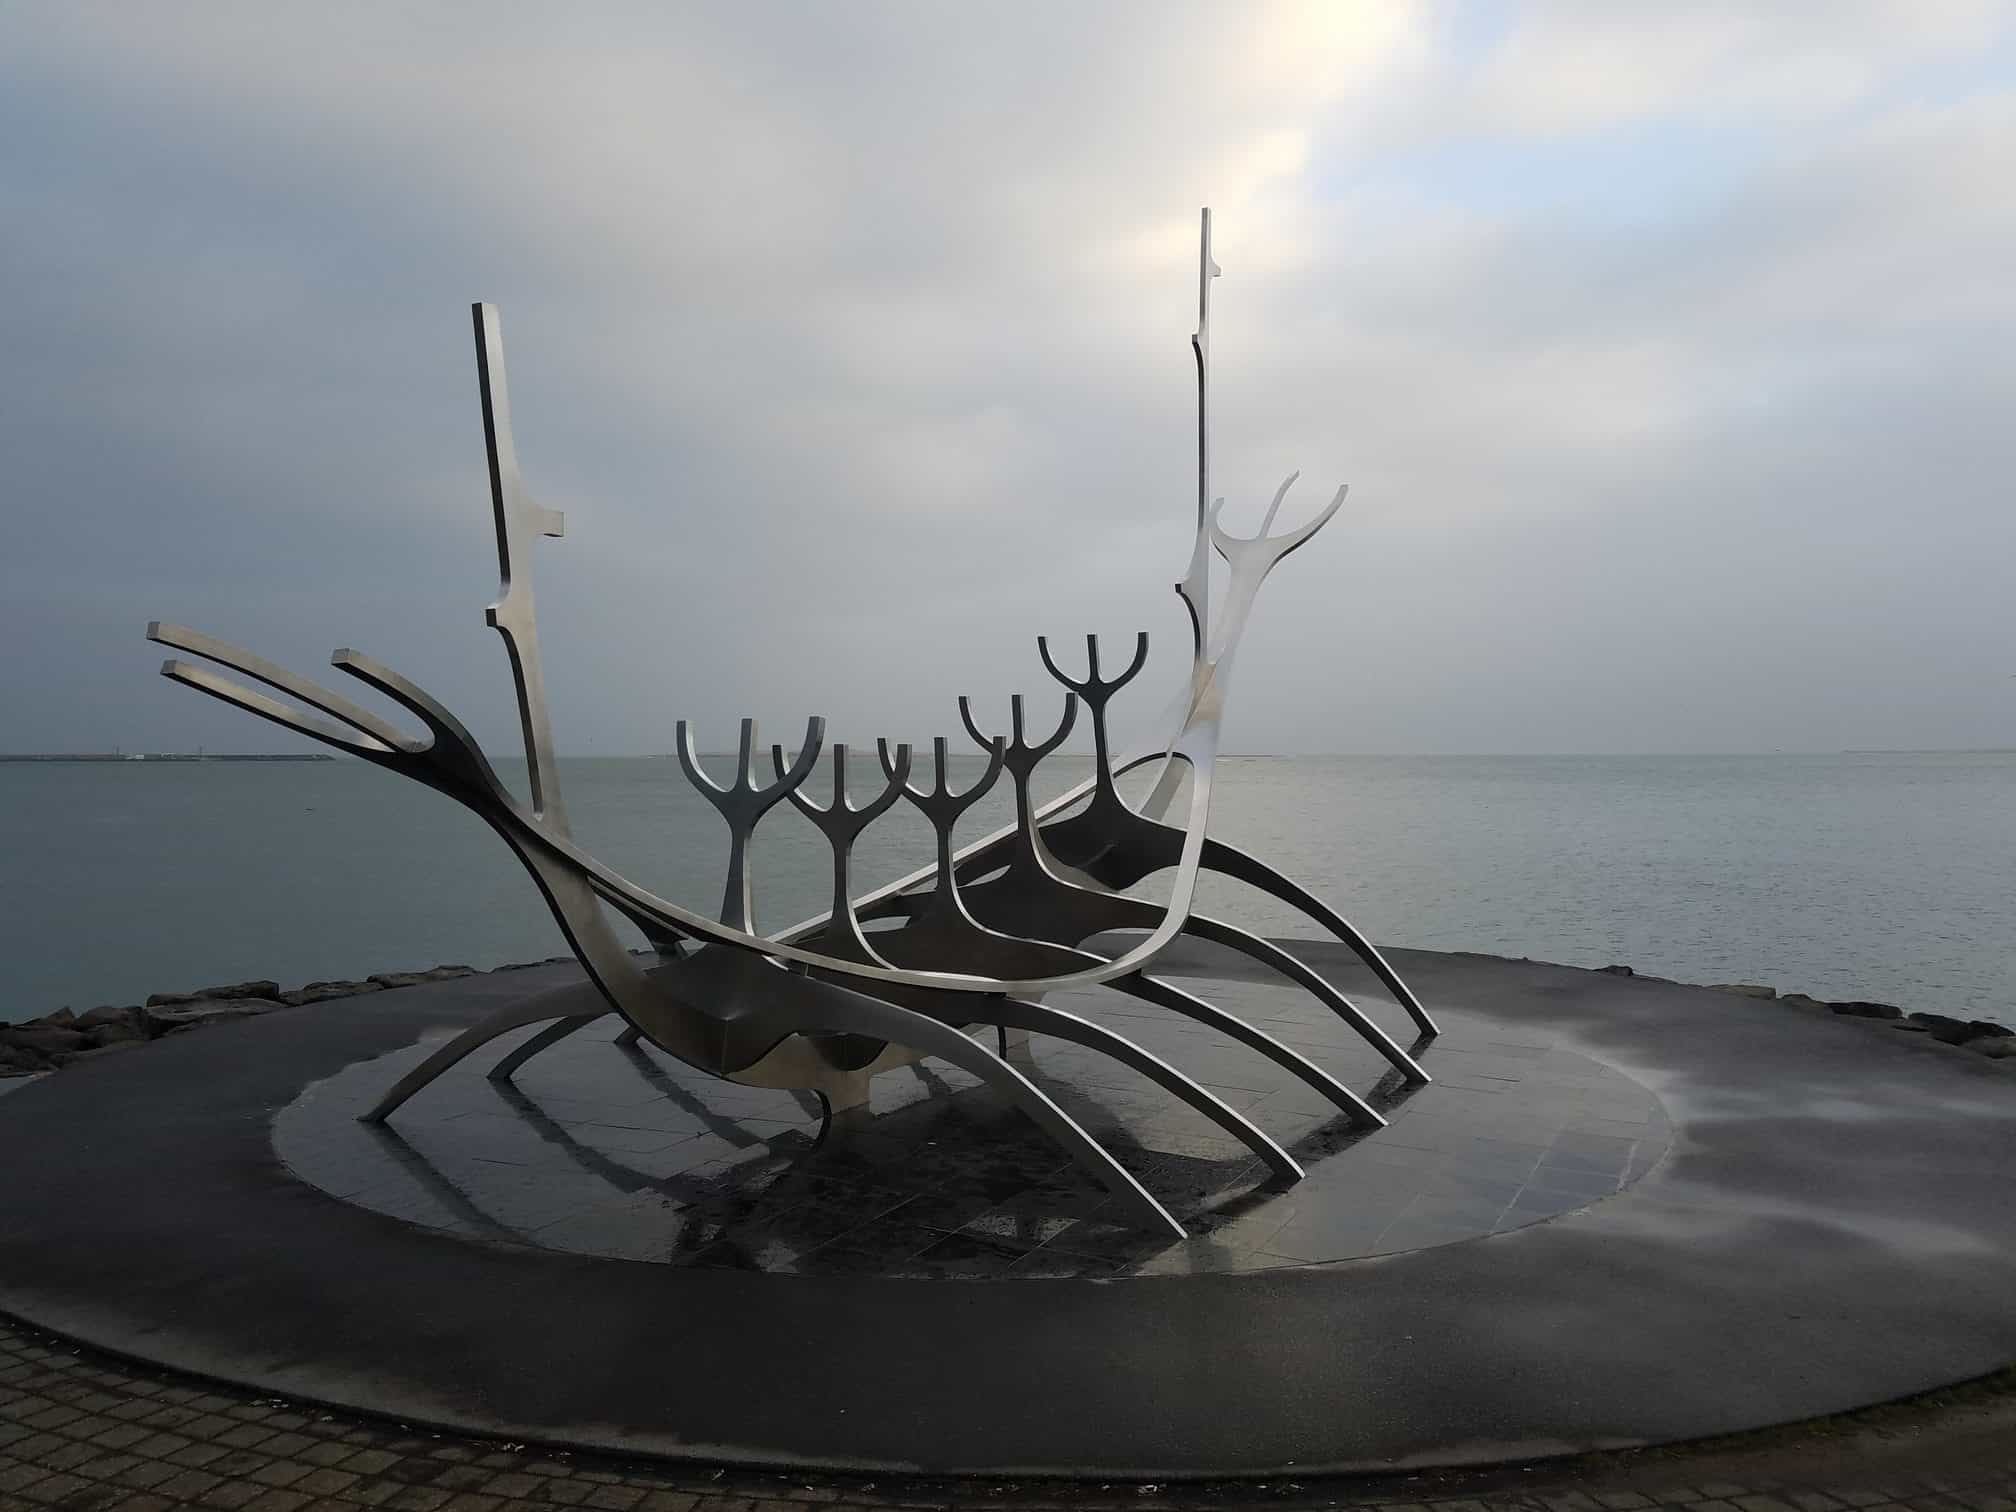 The famous sculpture by the sea in Reykjavik called Sólfarir